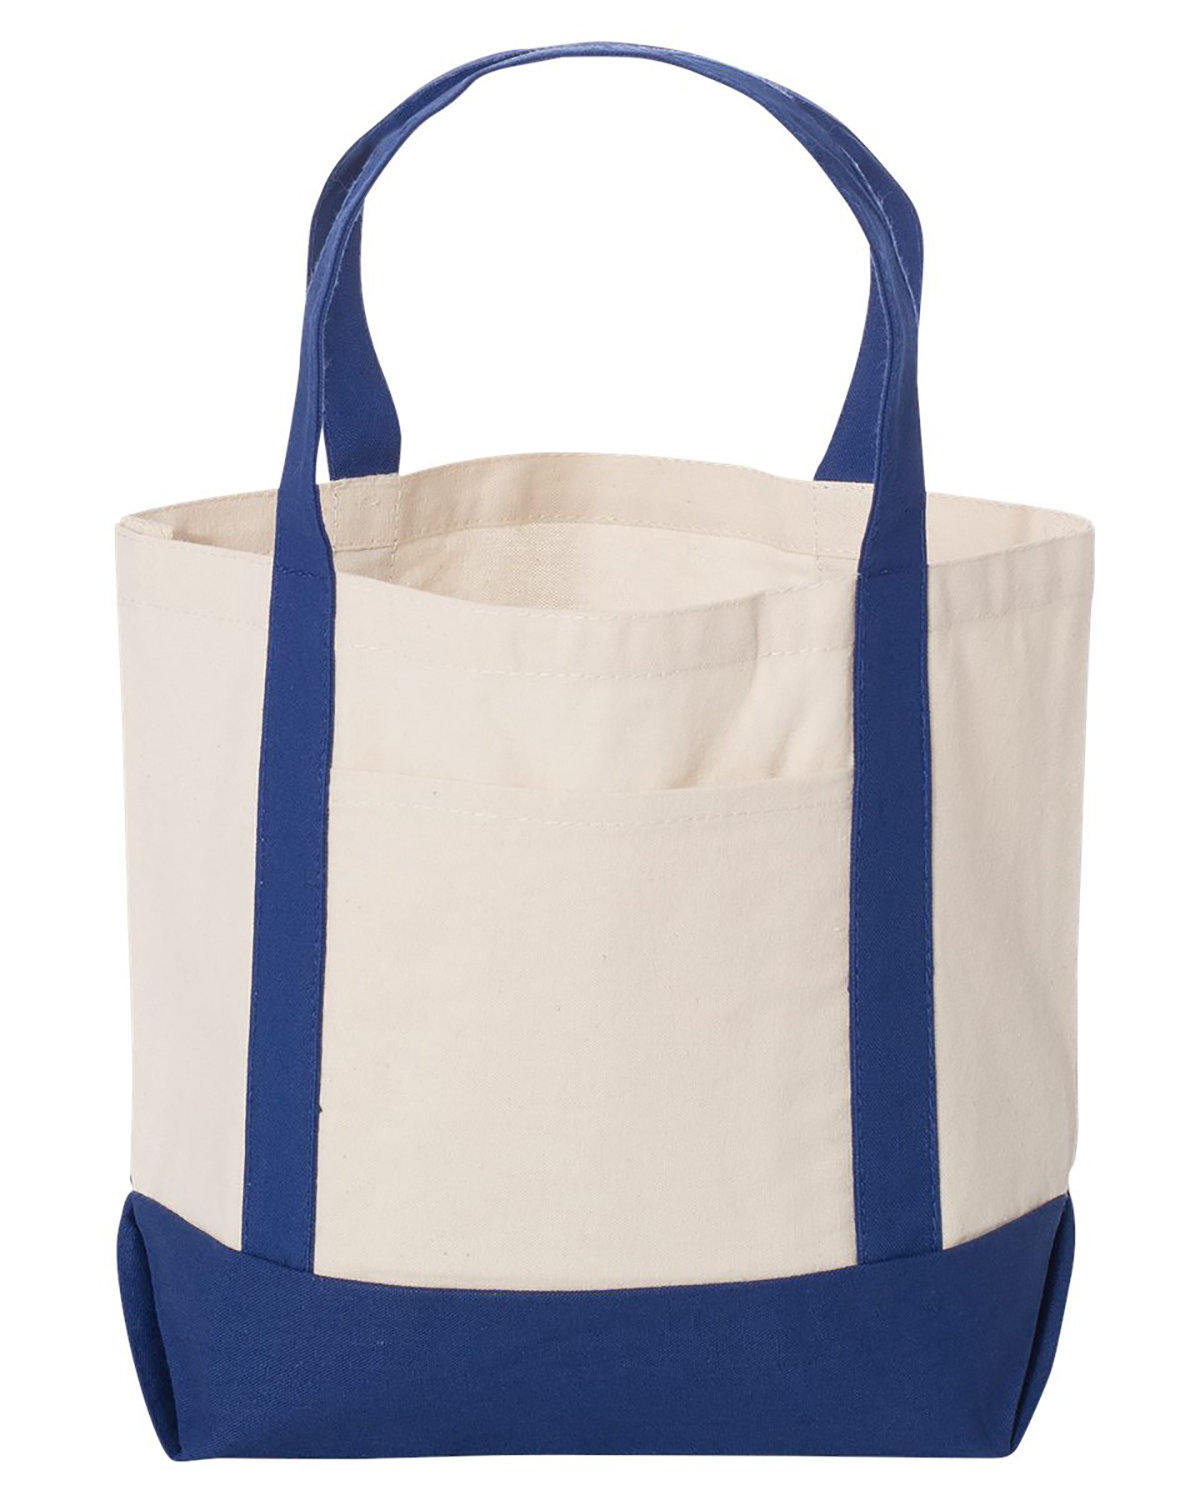 Liberty Bags Seaside Cotton Canvas Tote | alphabroder